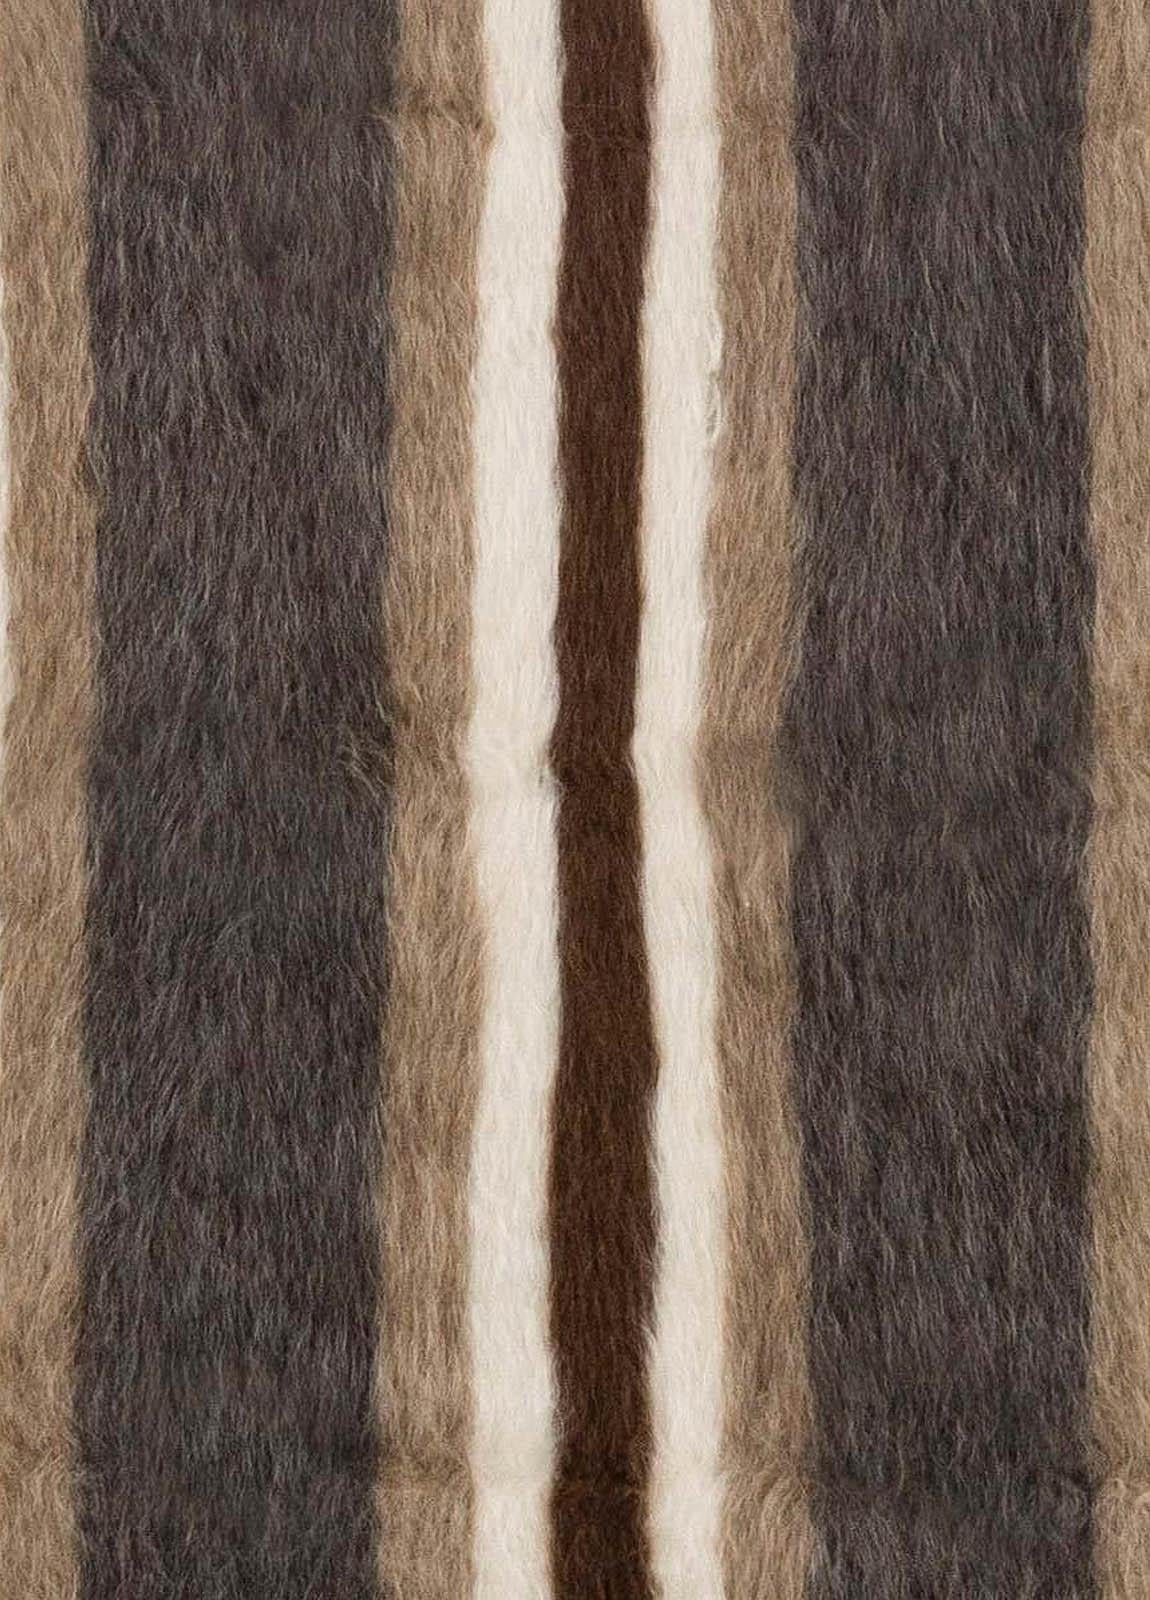 Hand-Woven Taurus Collection Striped Brown, White, Grey, Goat Hair Rug by Doris Leslie Blau For Sale